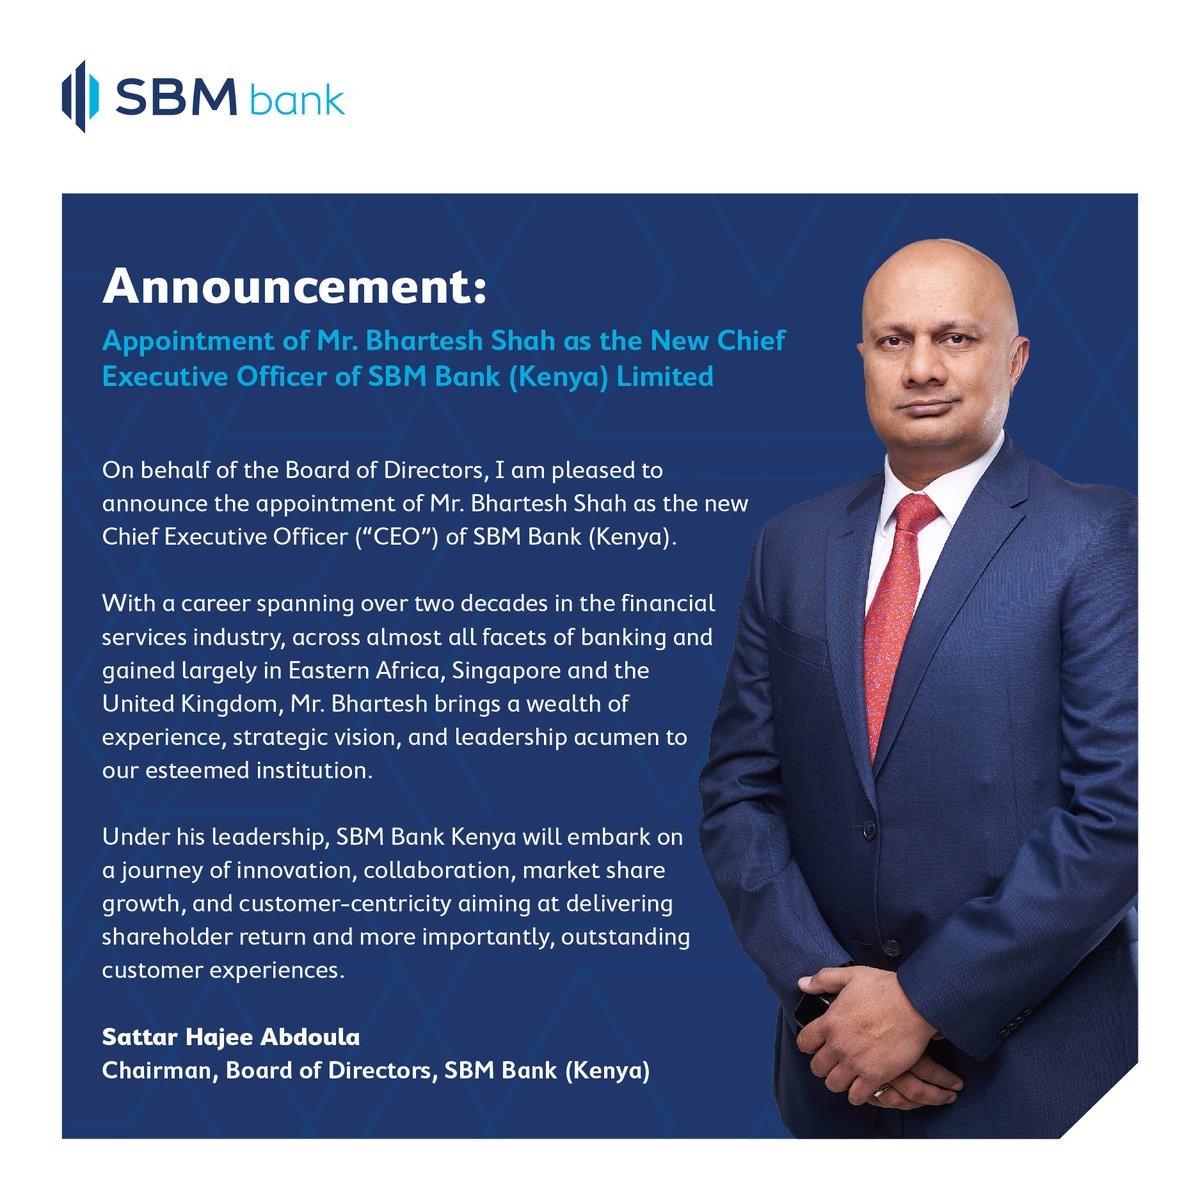 We are pleased to announce the appointment of Mr. Bhartesh Shah as our New Chief Executive Officer. Full details here: bit.ly/SBM_CEO_appoin… #ForASmarterTomorrow